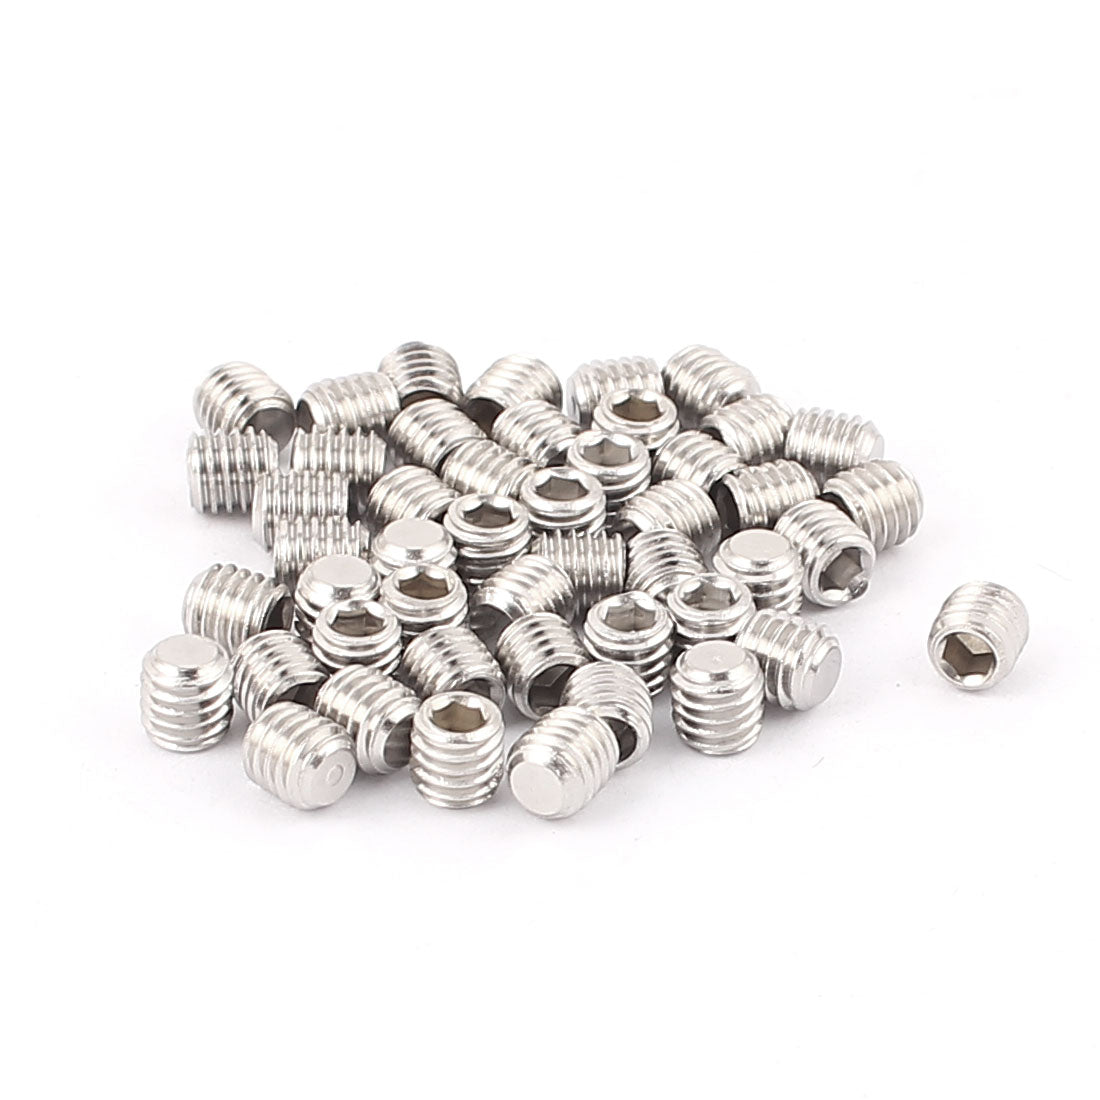 uxcell Uxcell M5 x 5mm Stainless Steel Hex Socket Grub Screws Nuts Fasteners 50pcs